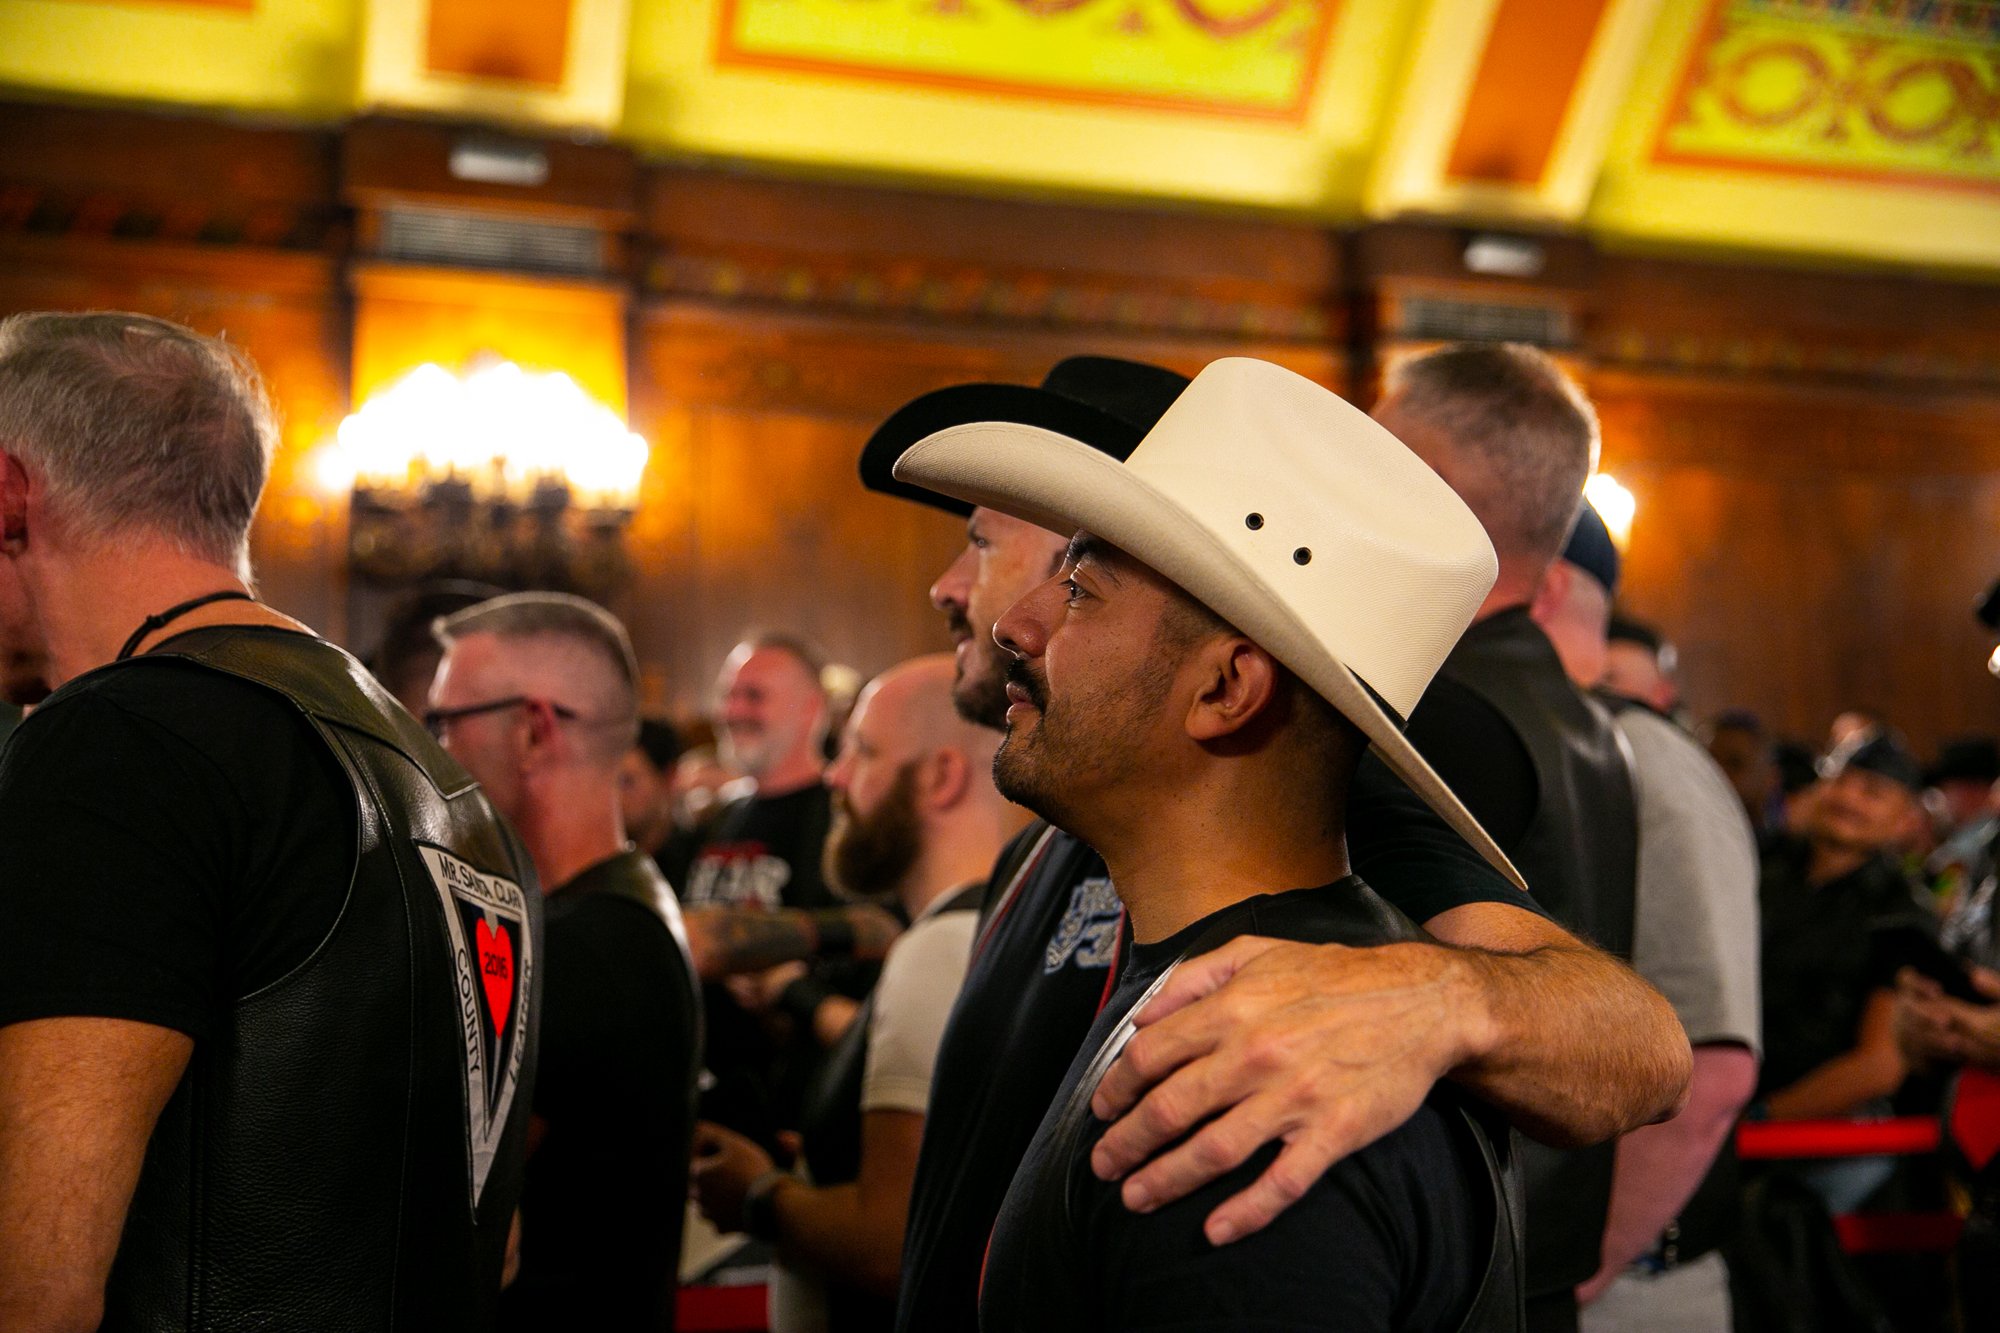  Sam puts his arm around his fiancé, Oscar, during the Opening Ceremonies of International Mister Leather 45, held in The Florentine Room at The Congress Plaza Hotel, Thursday May 25, 2023, Chicago, IL.   On Saturday the two will be married in the ve